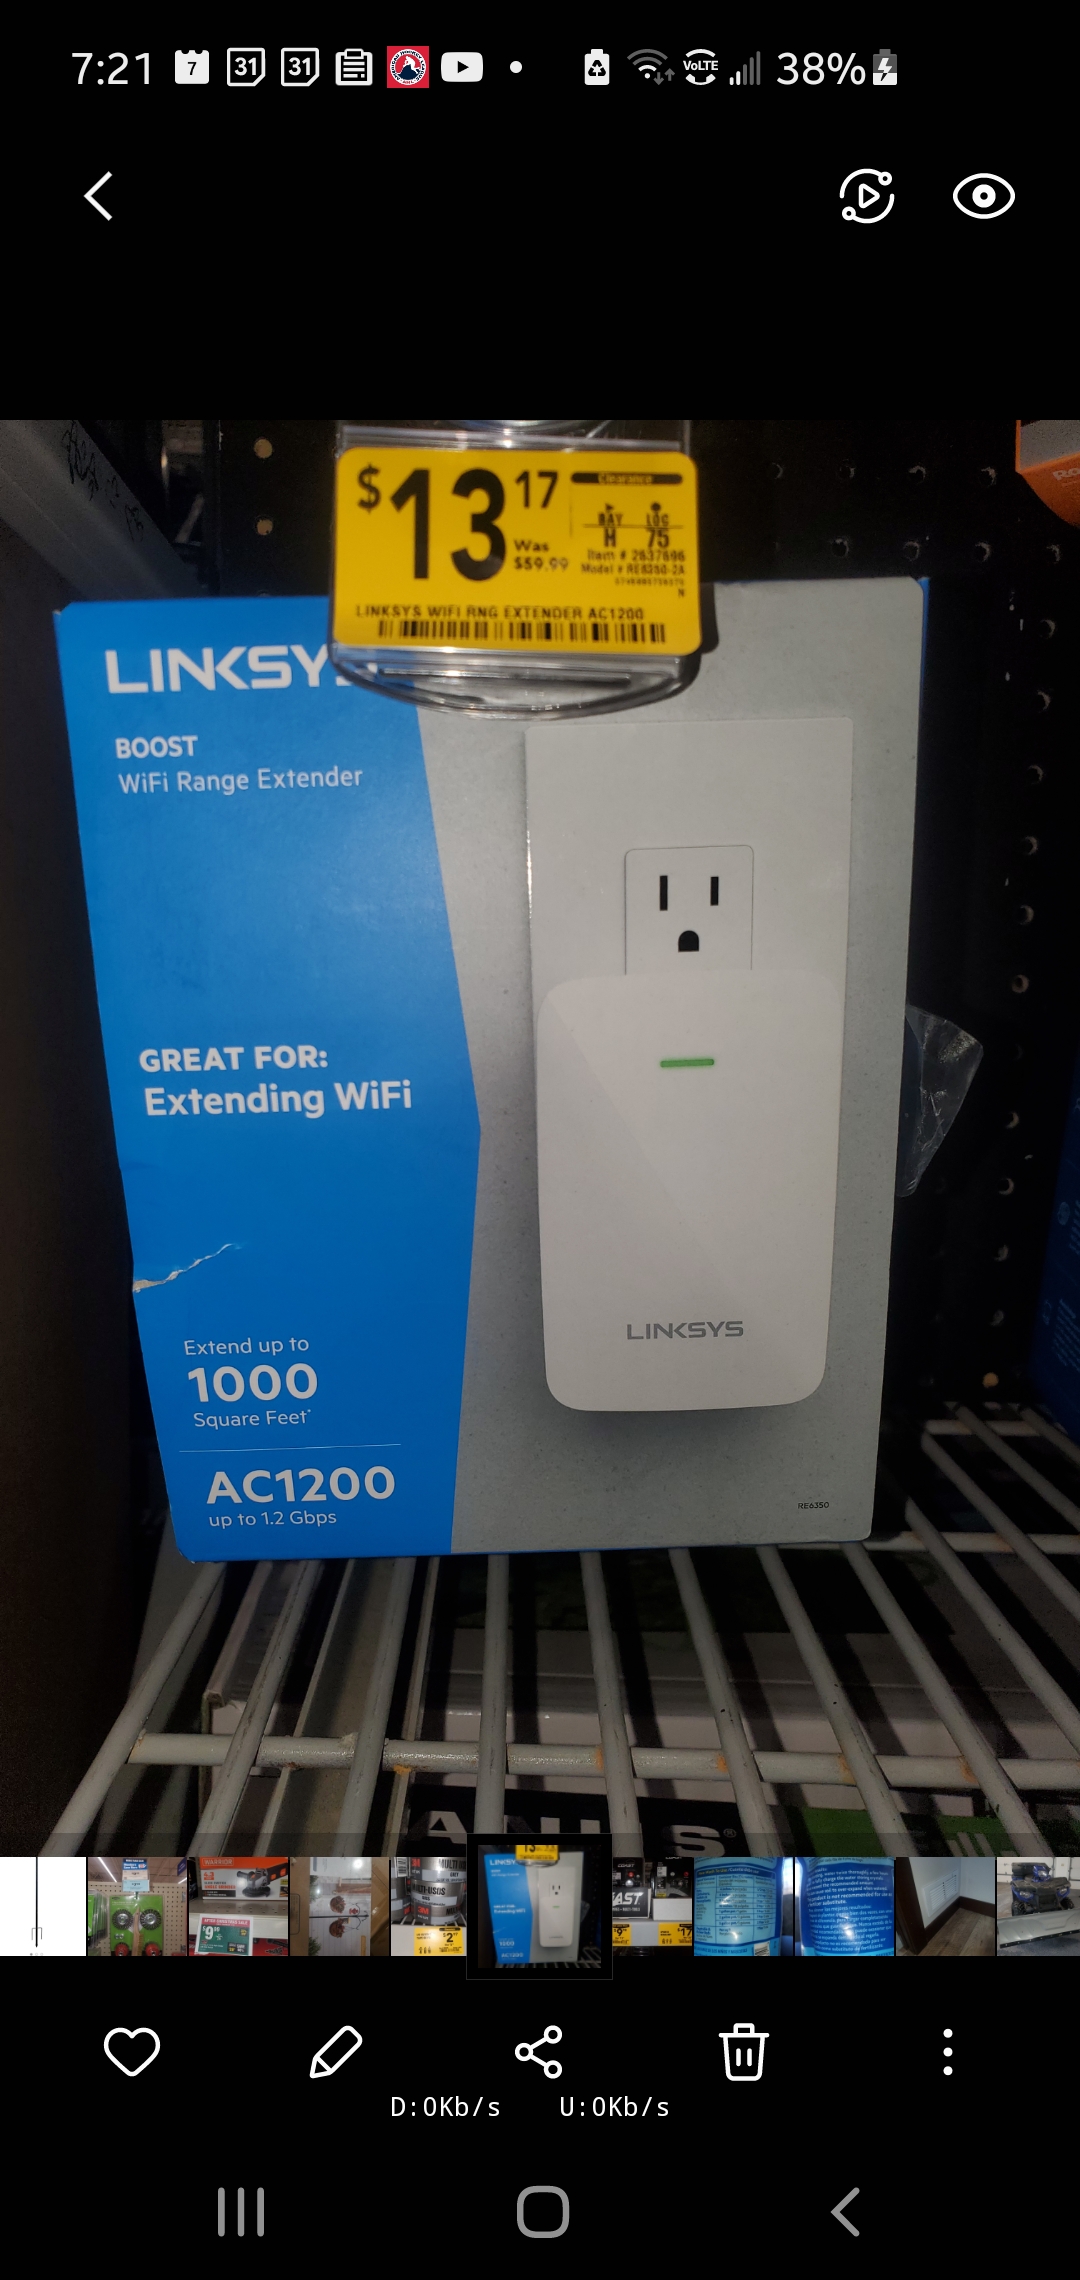 Linksys RE6350 AC1200 Dual-Band WiFi Extender @ Lowe's--Clearanced from $59.99 to $13.17. YMMV $13.17